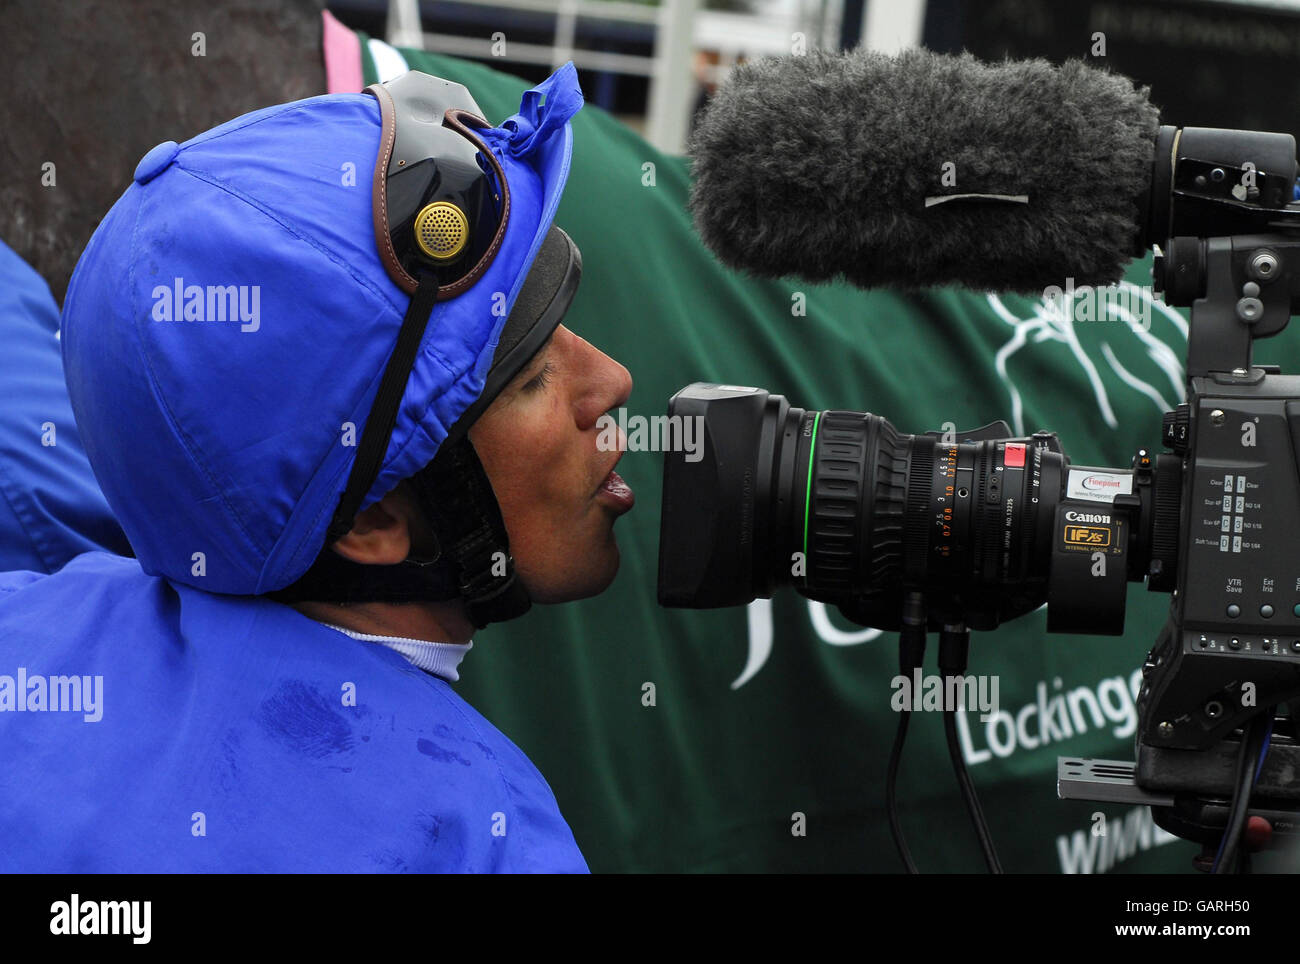 Frankie Dettori after victory on Creachadoir in The Juddmonte Lockinge Stakes during the Juddmonte Lockinge Day at Newbury Racecourse. Stock Photo